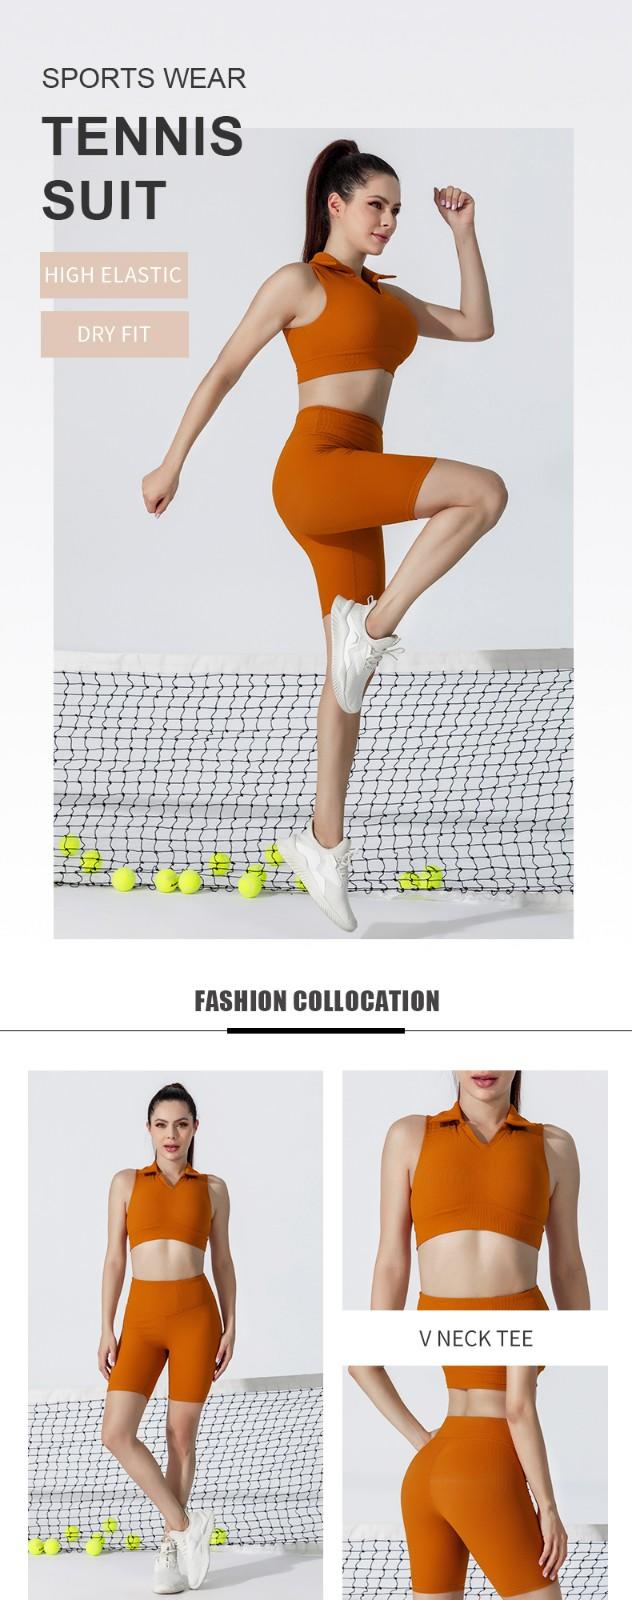 soft women's tennis outfits for-sale for ladies